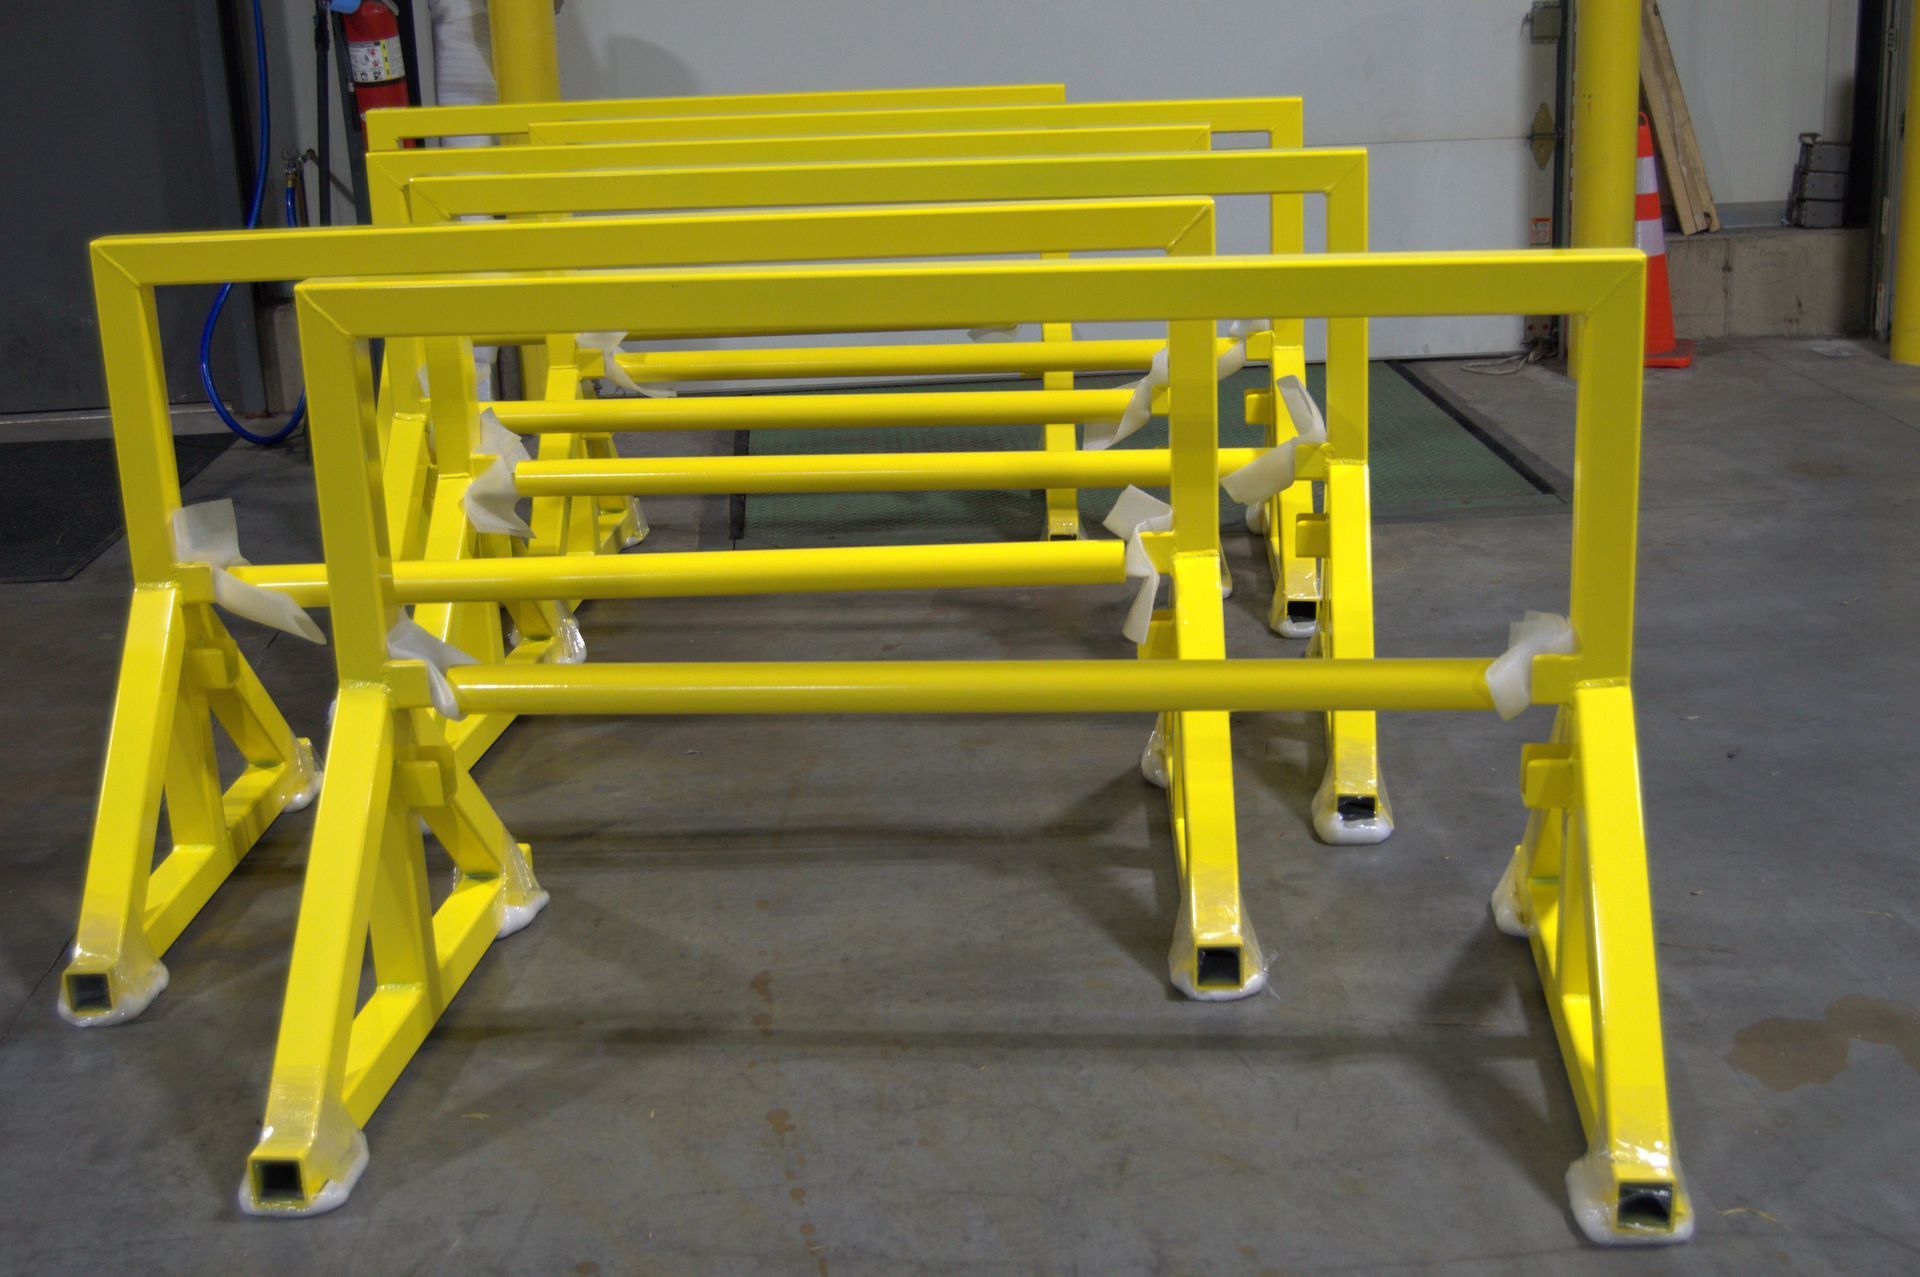 Powder Coating Services by Preferred Machine